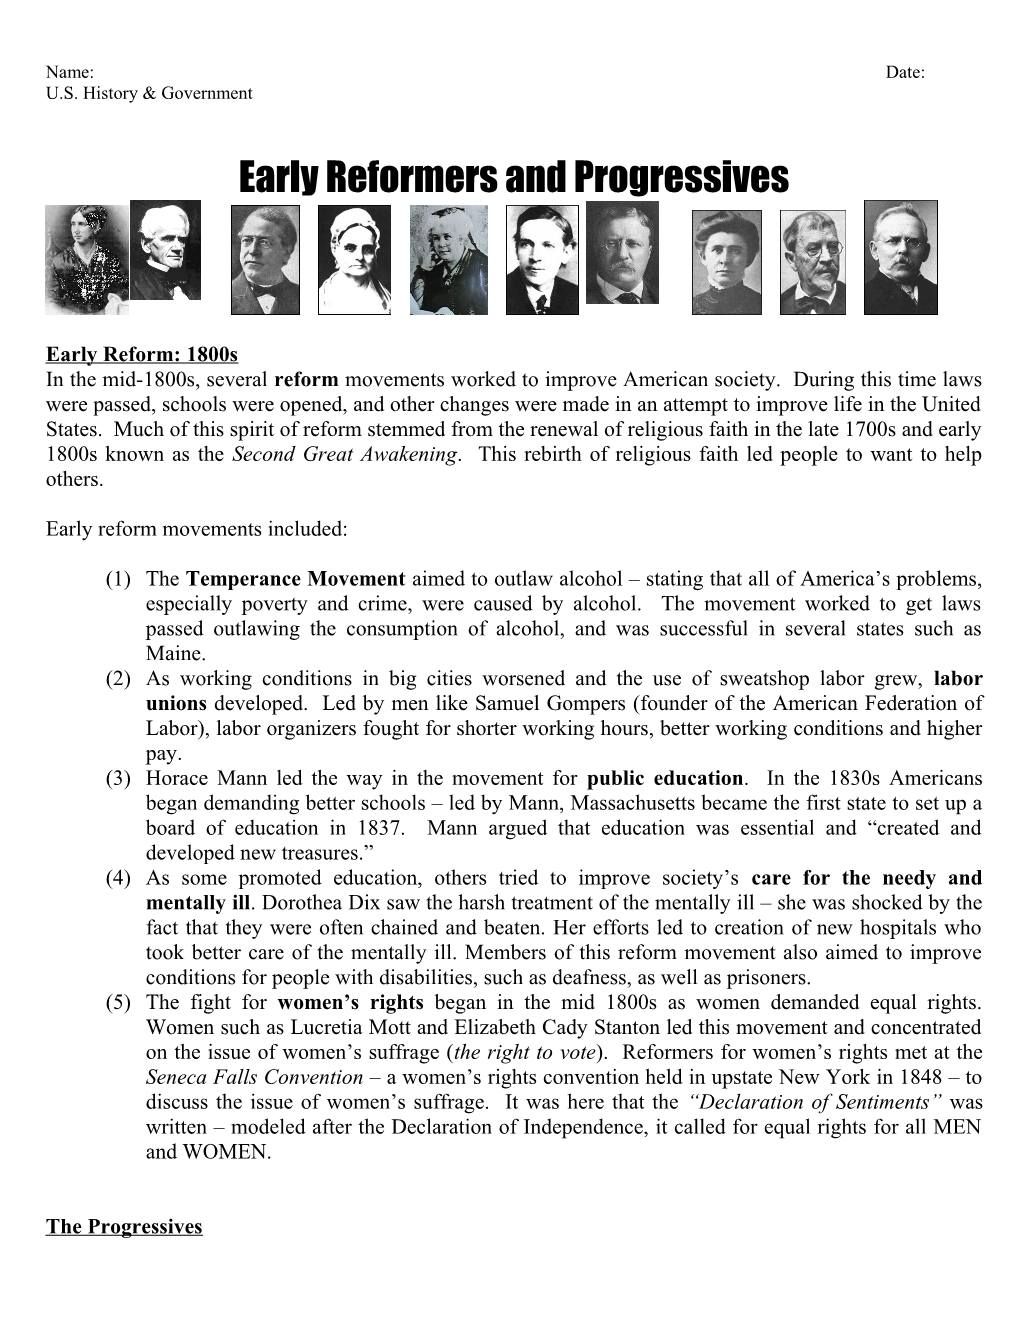 Early Reformers and Progressives